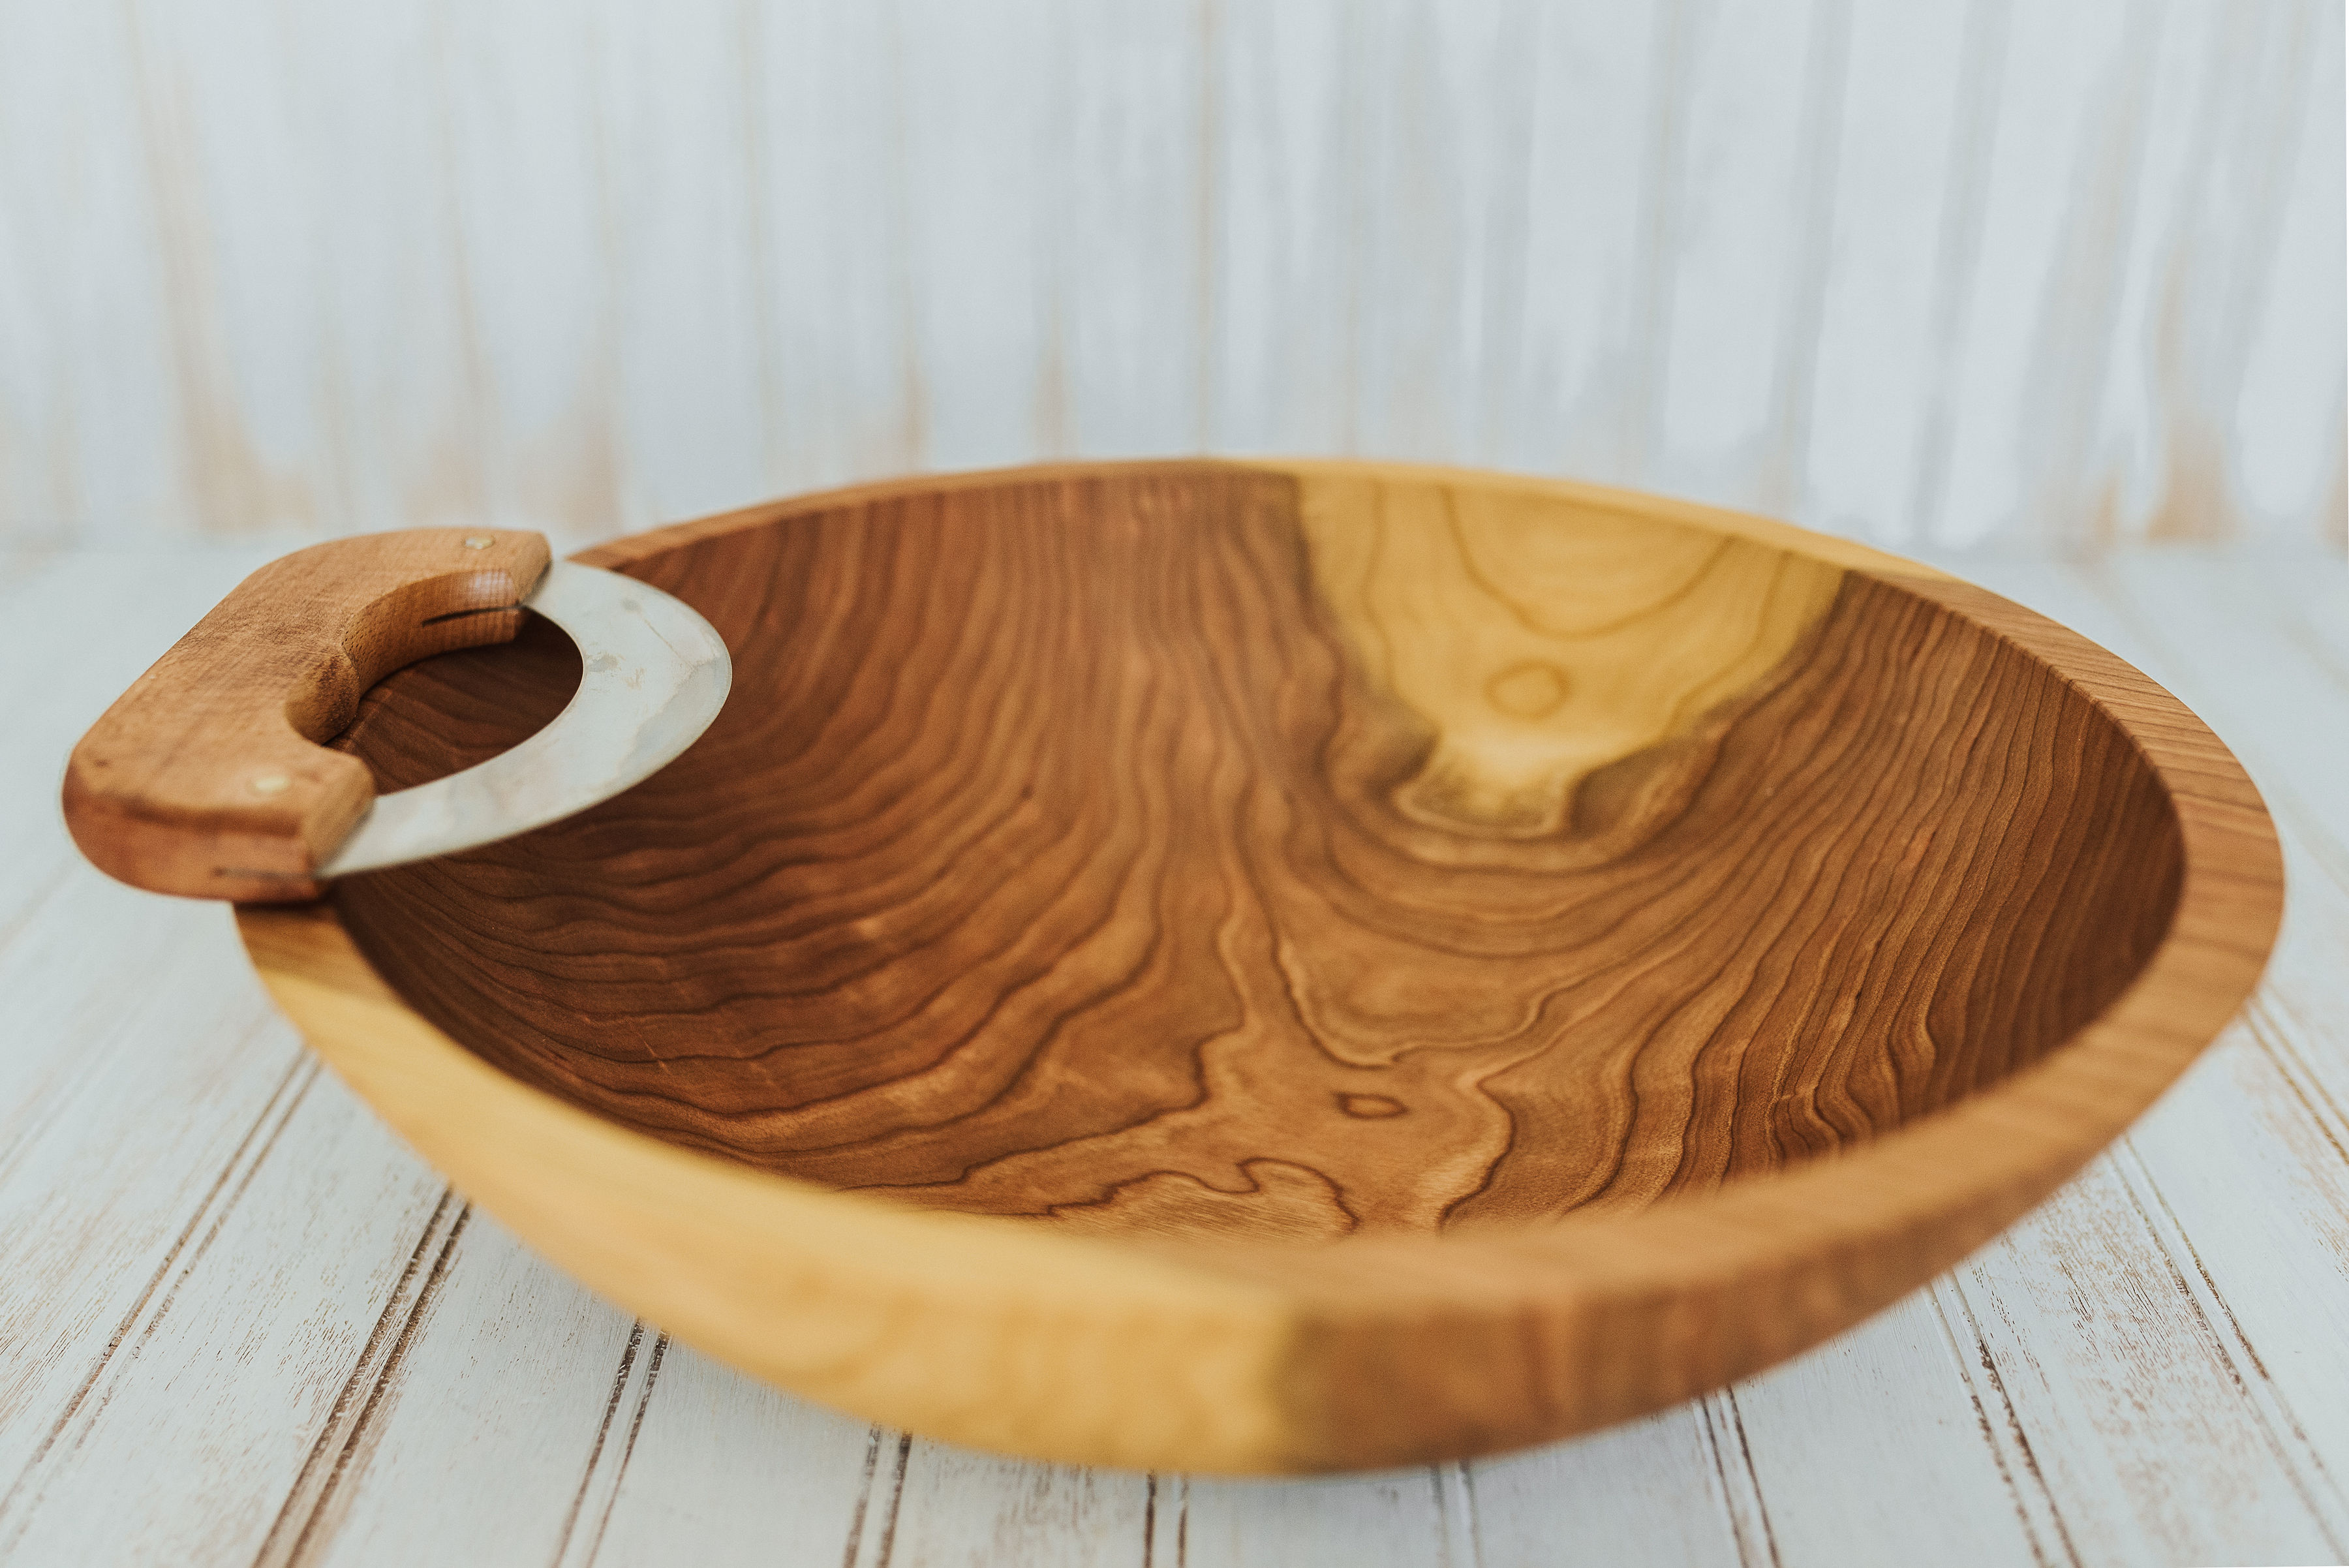 Handcrafted Chopping Bowl with Mezzaluna – Farmhouse Pottery